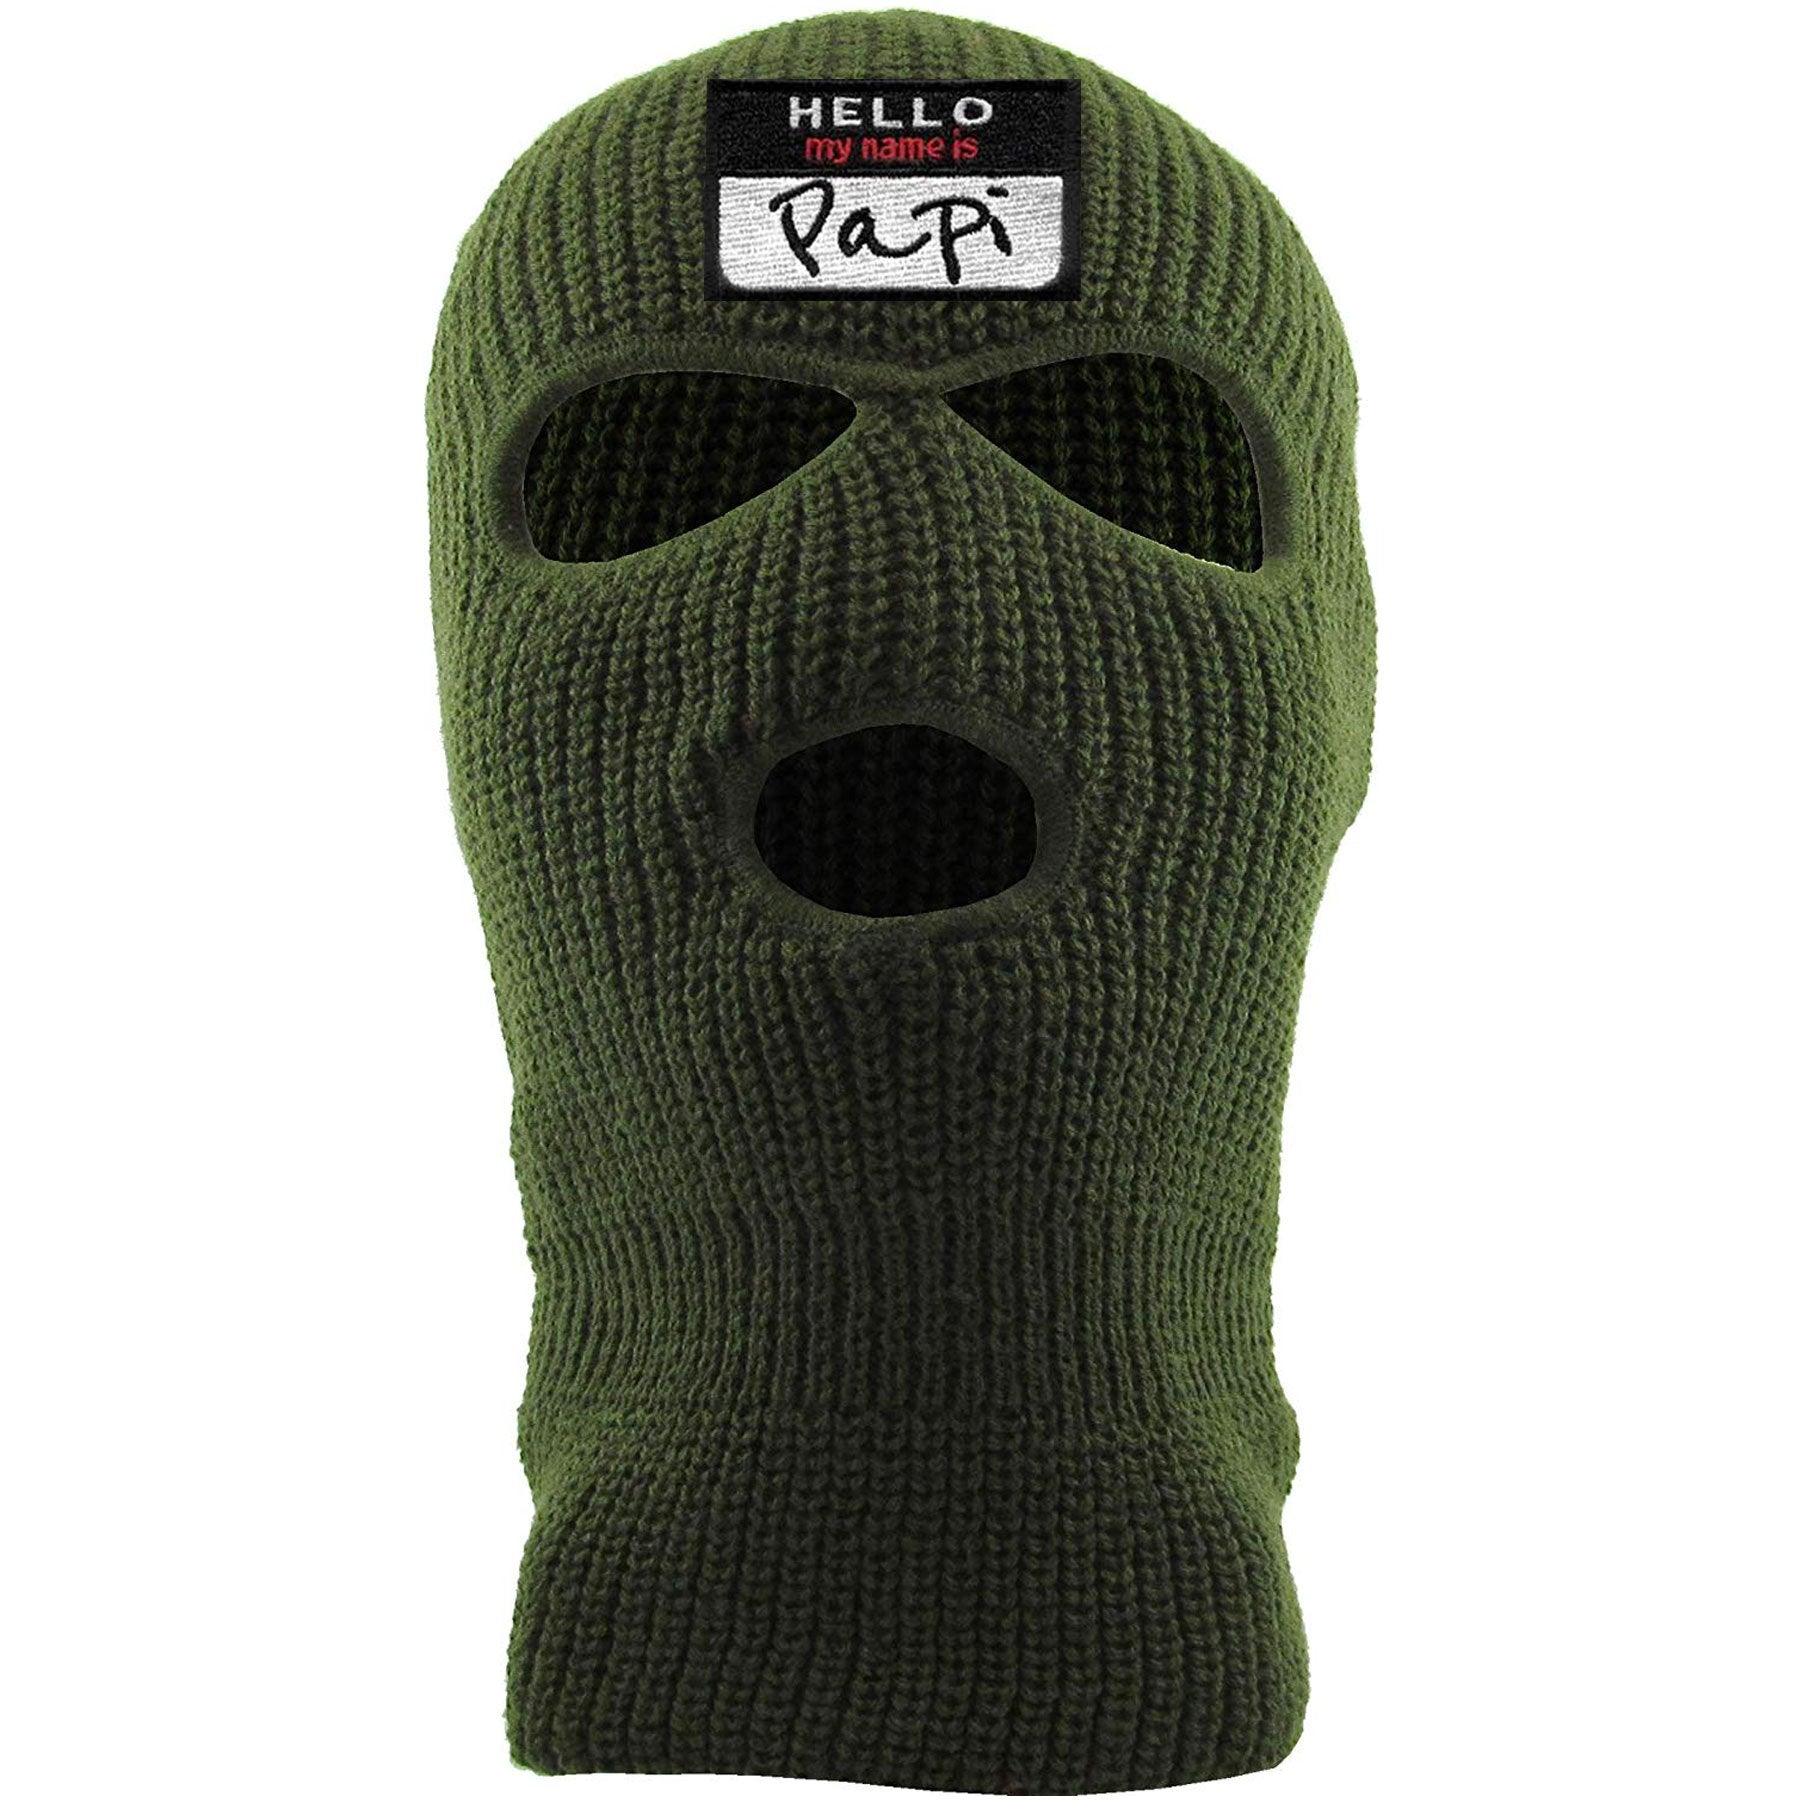 Embroidered on the front of the hello my name is papi ski mask is the olive green 3 hole ski mask